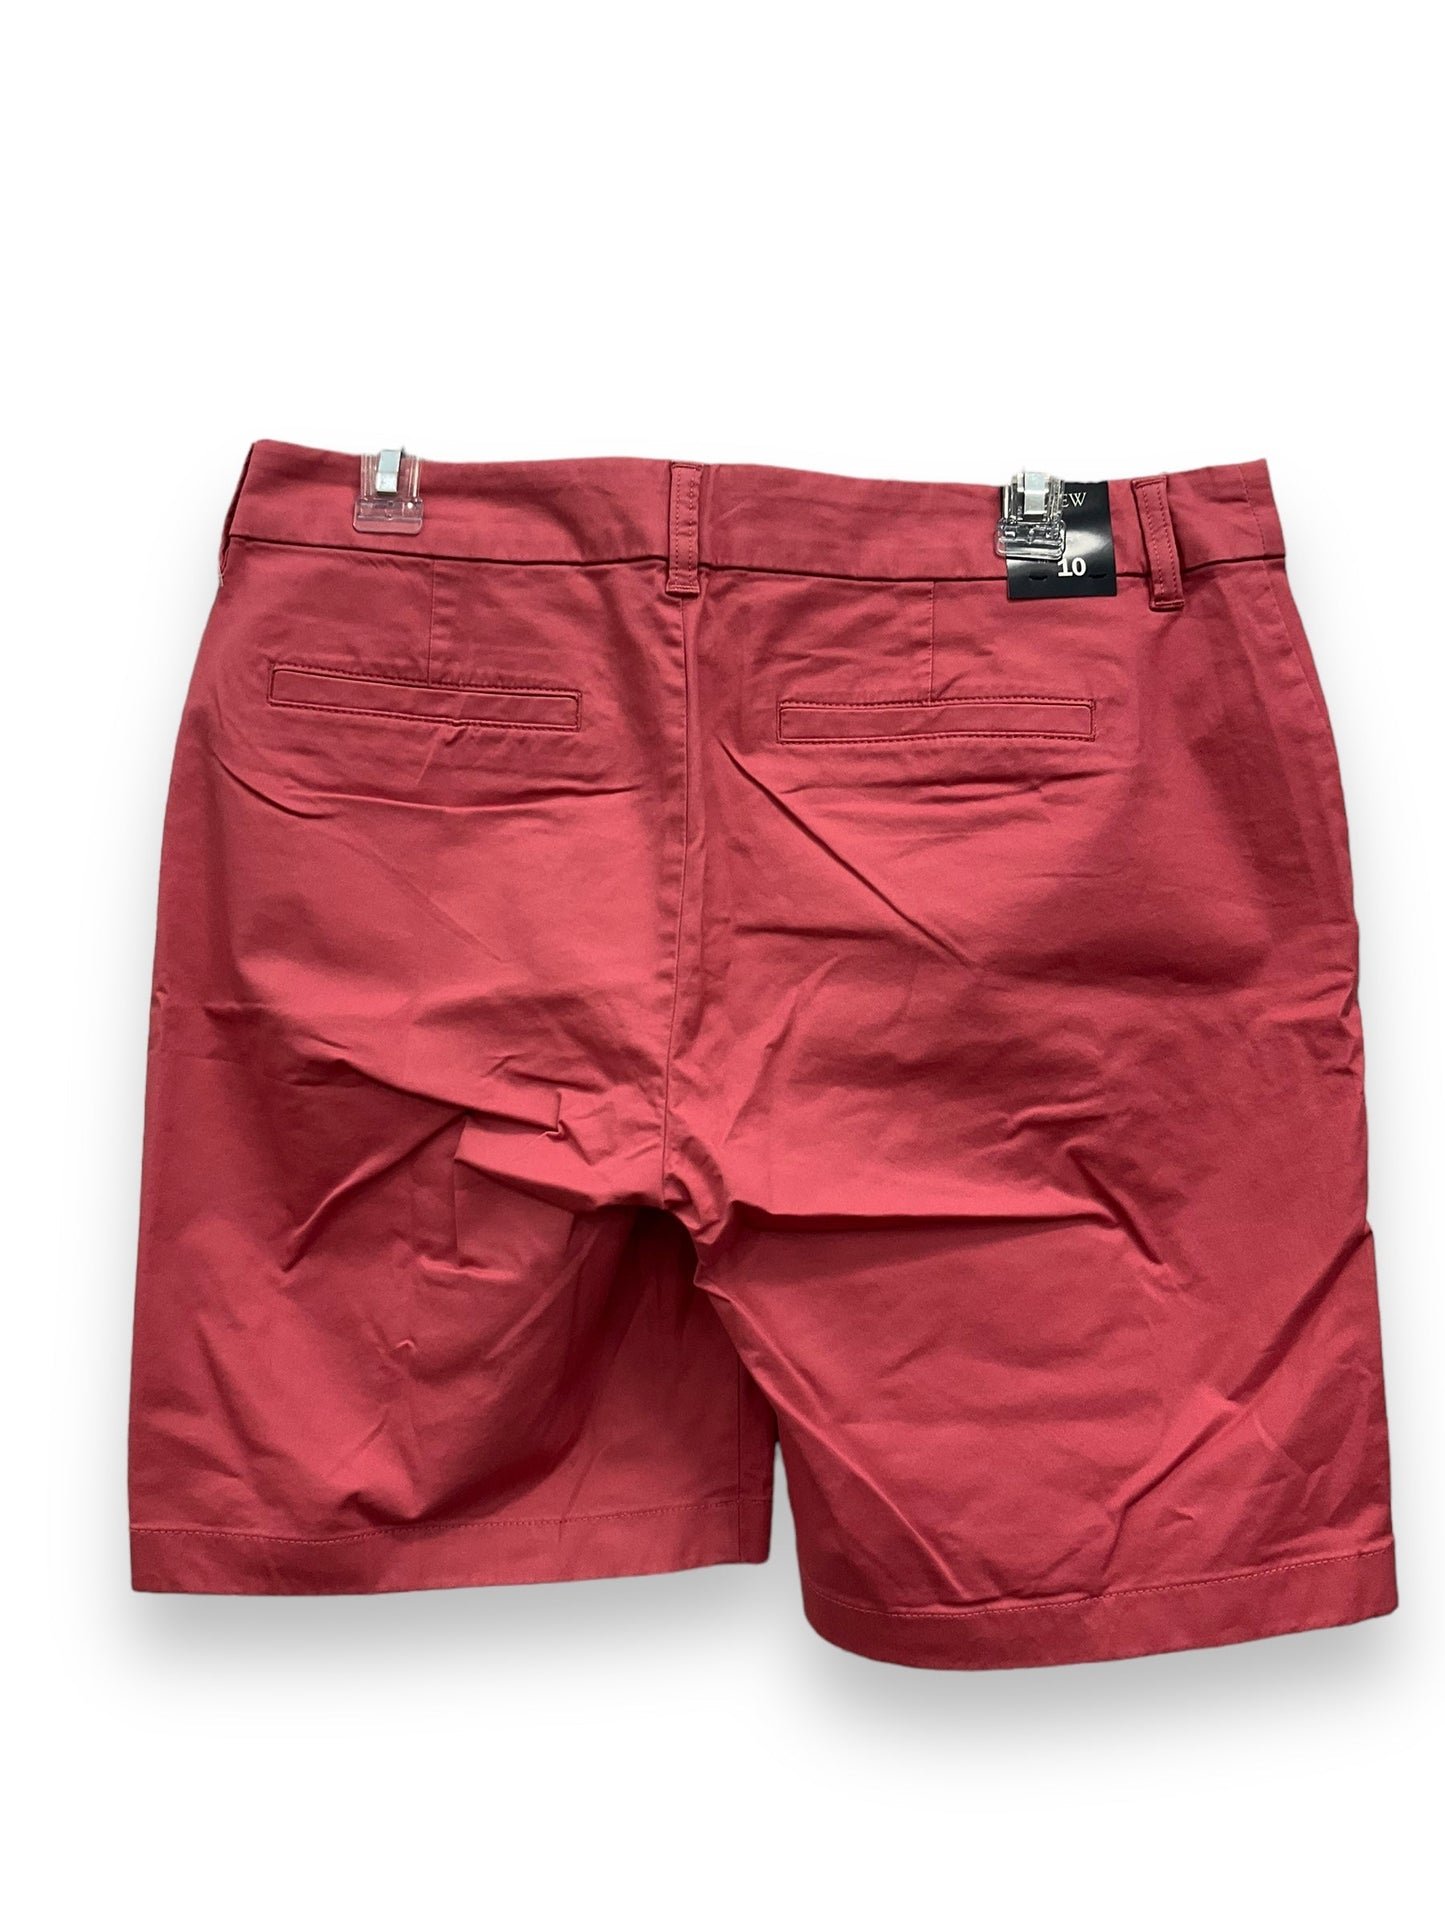 Red Shorts J. Crew, Size 10